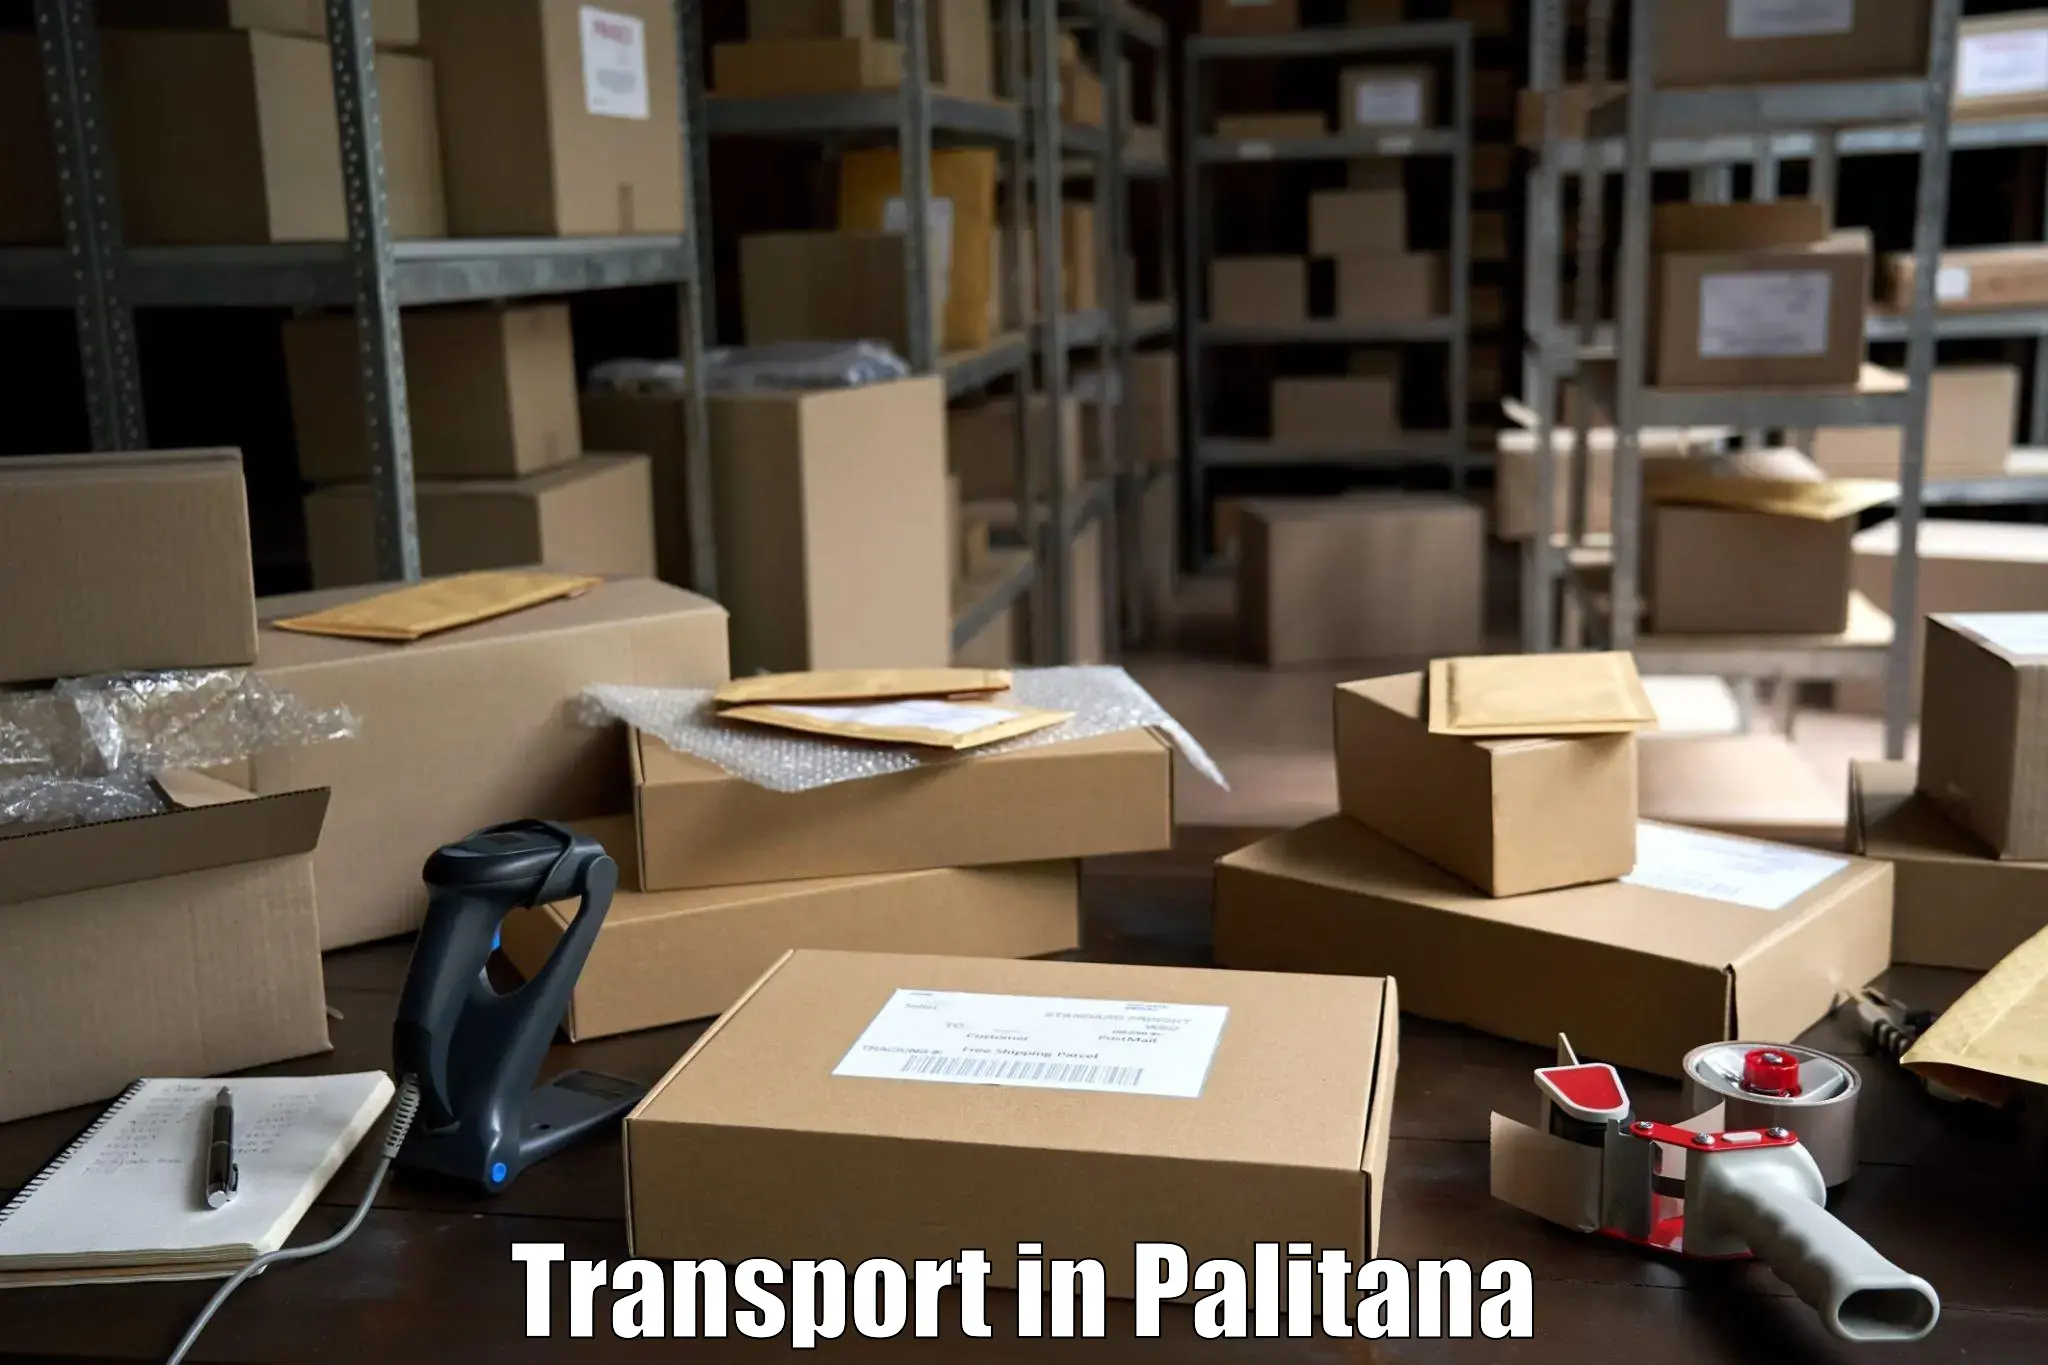 Road transport online services in Palitana